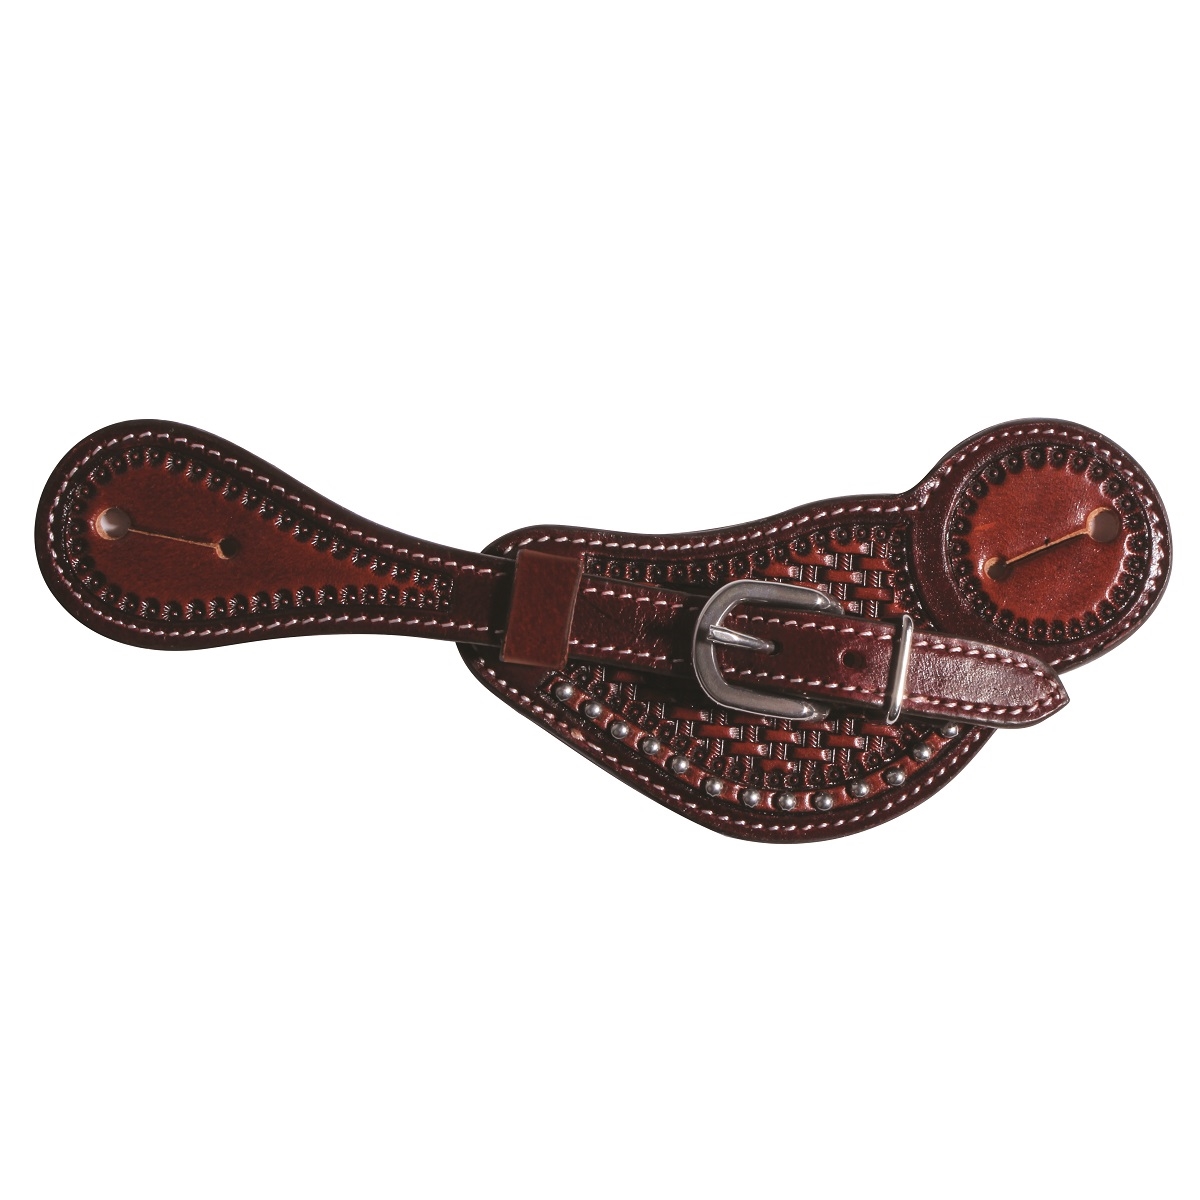 Professional´s Choice Dotted Buckaroo Spur Strap B